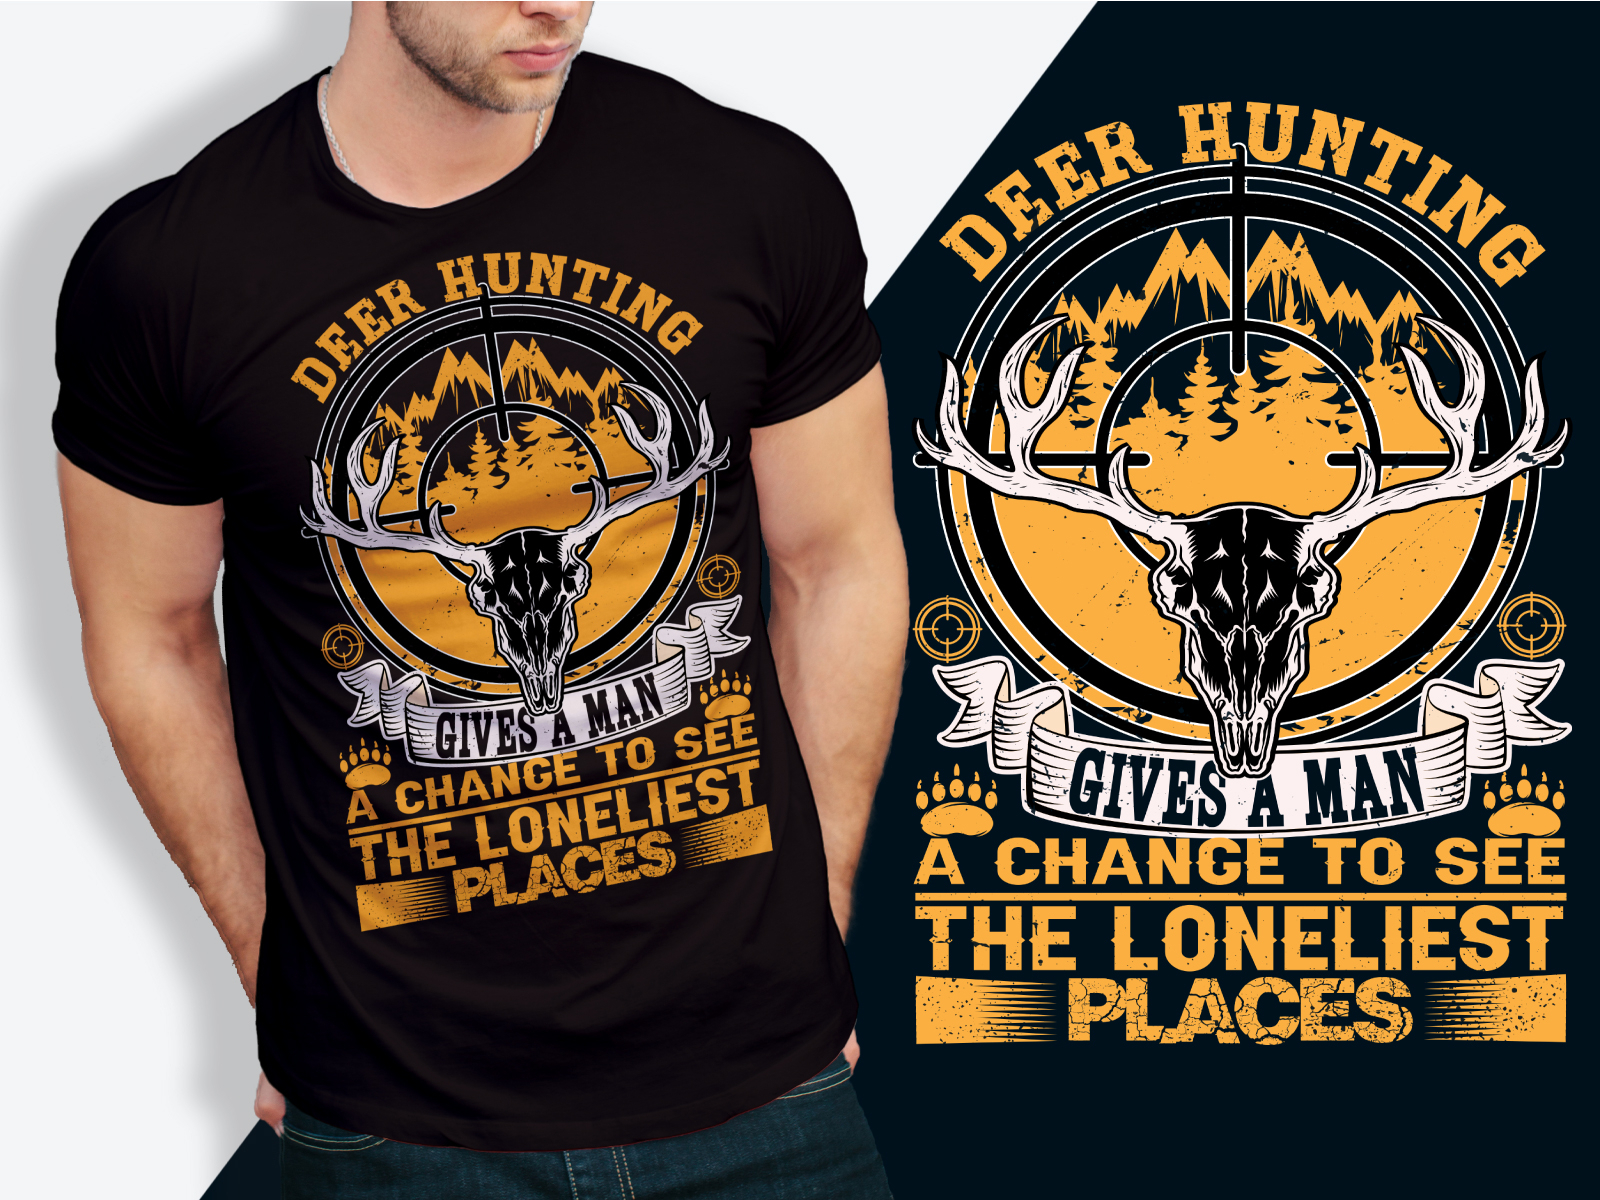 HUNTING T SHIRT DESIGN by T-SHIRT SHOPE on Dribbble